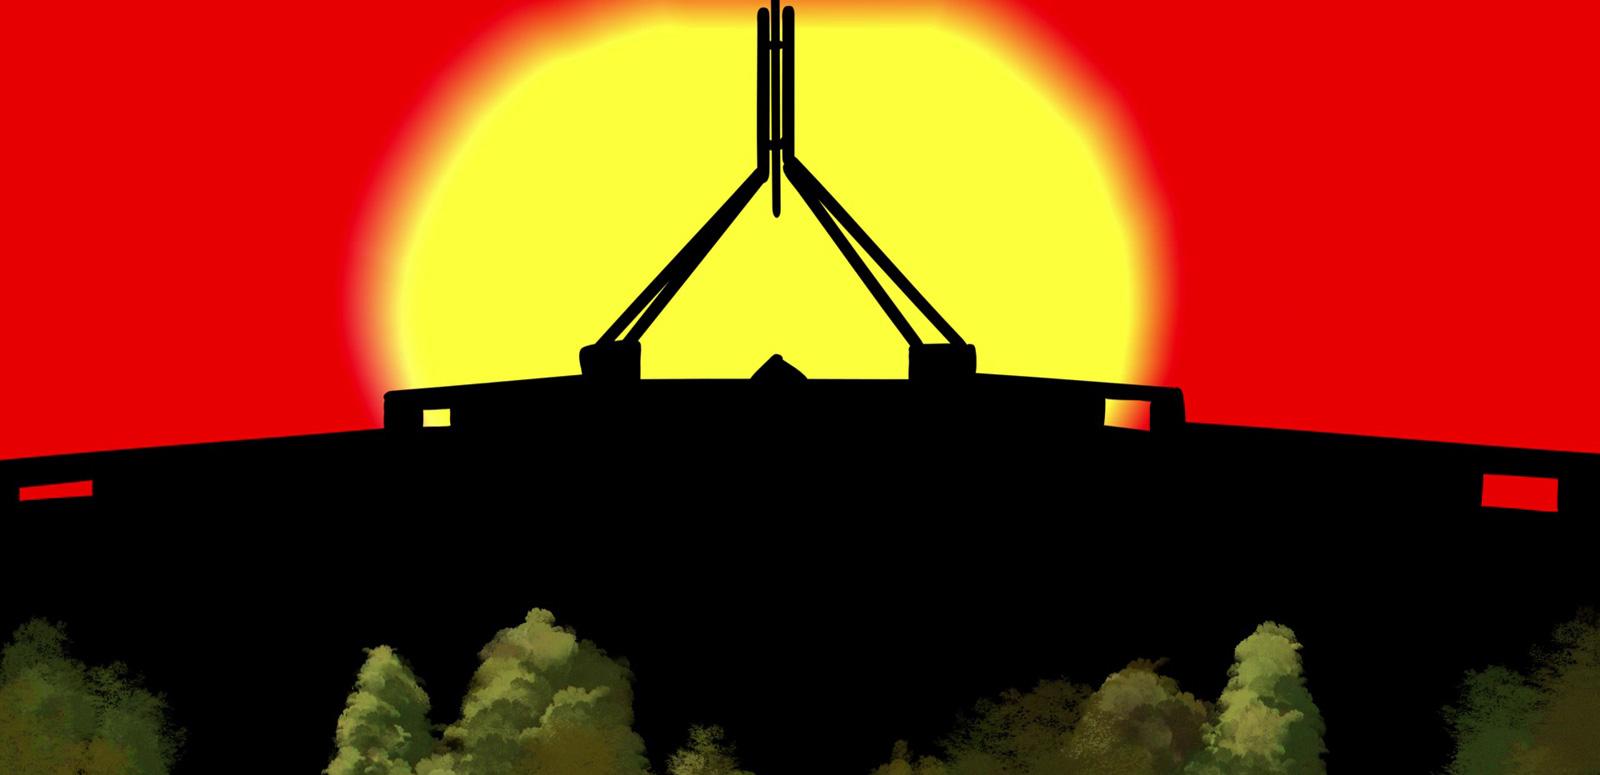 An animation cell showing a silhouette of Australia's parliament house in Canberra set against a background of a bright sun, red sky and black earth which is meant to represent the Aboriginal flag.